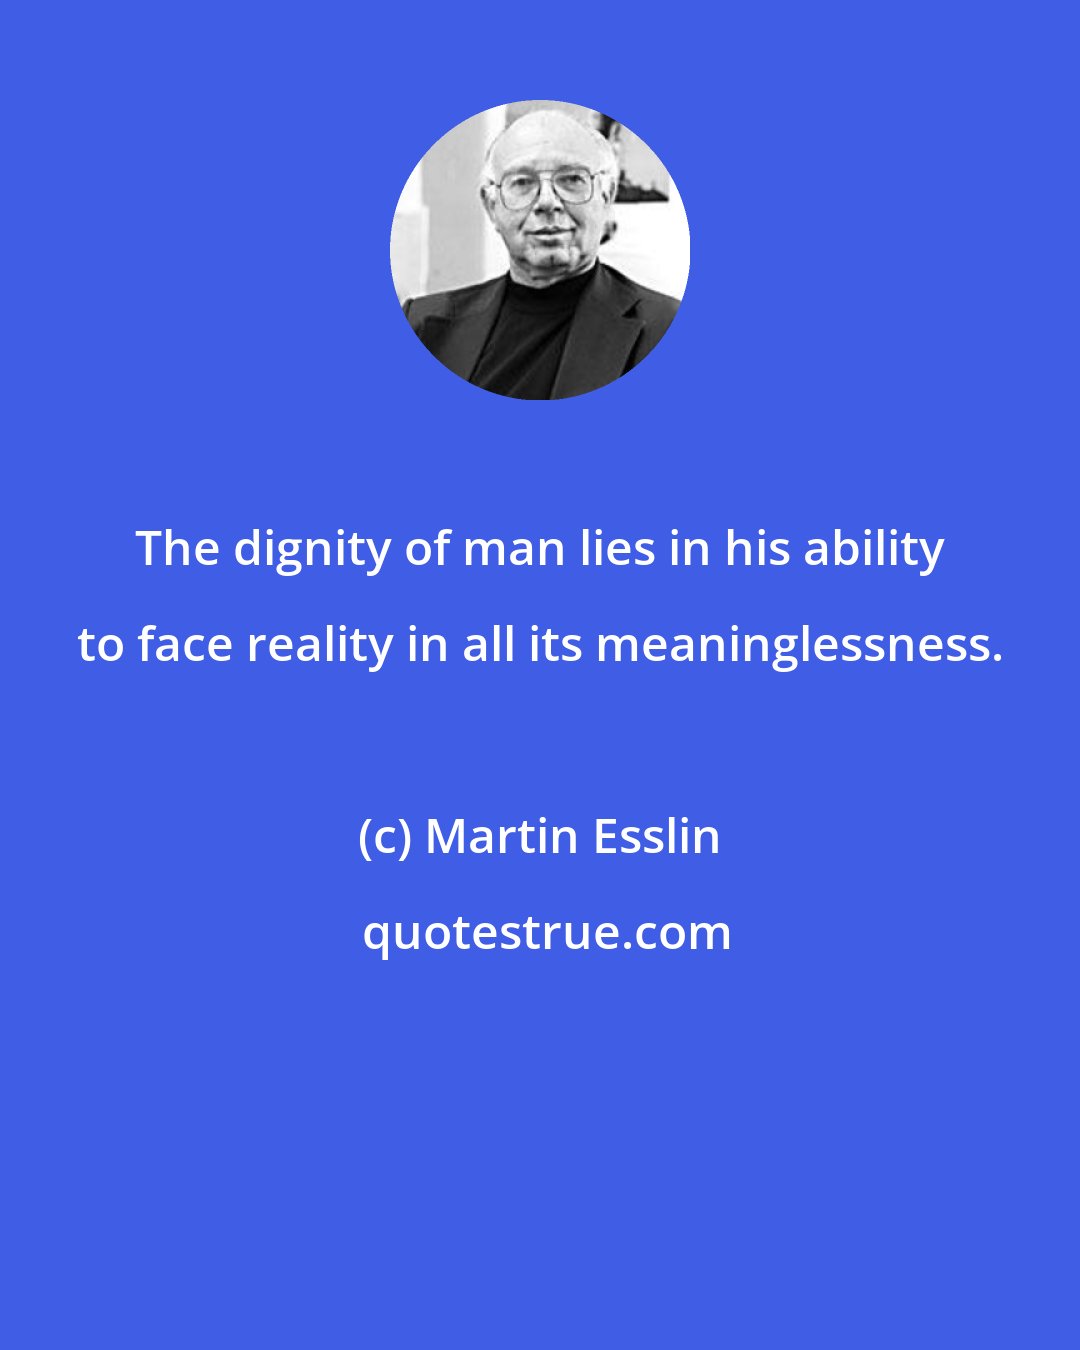 Martin Esslin: The dignity of man lies in his ability to face reality in all its meaninglessness.